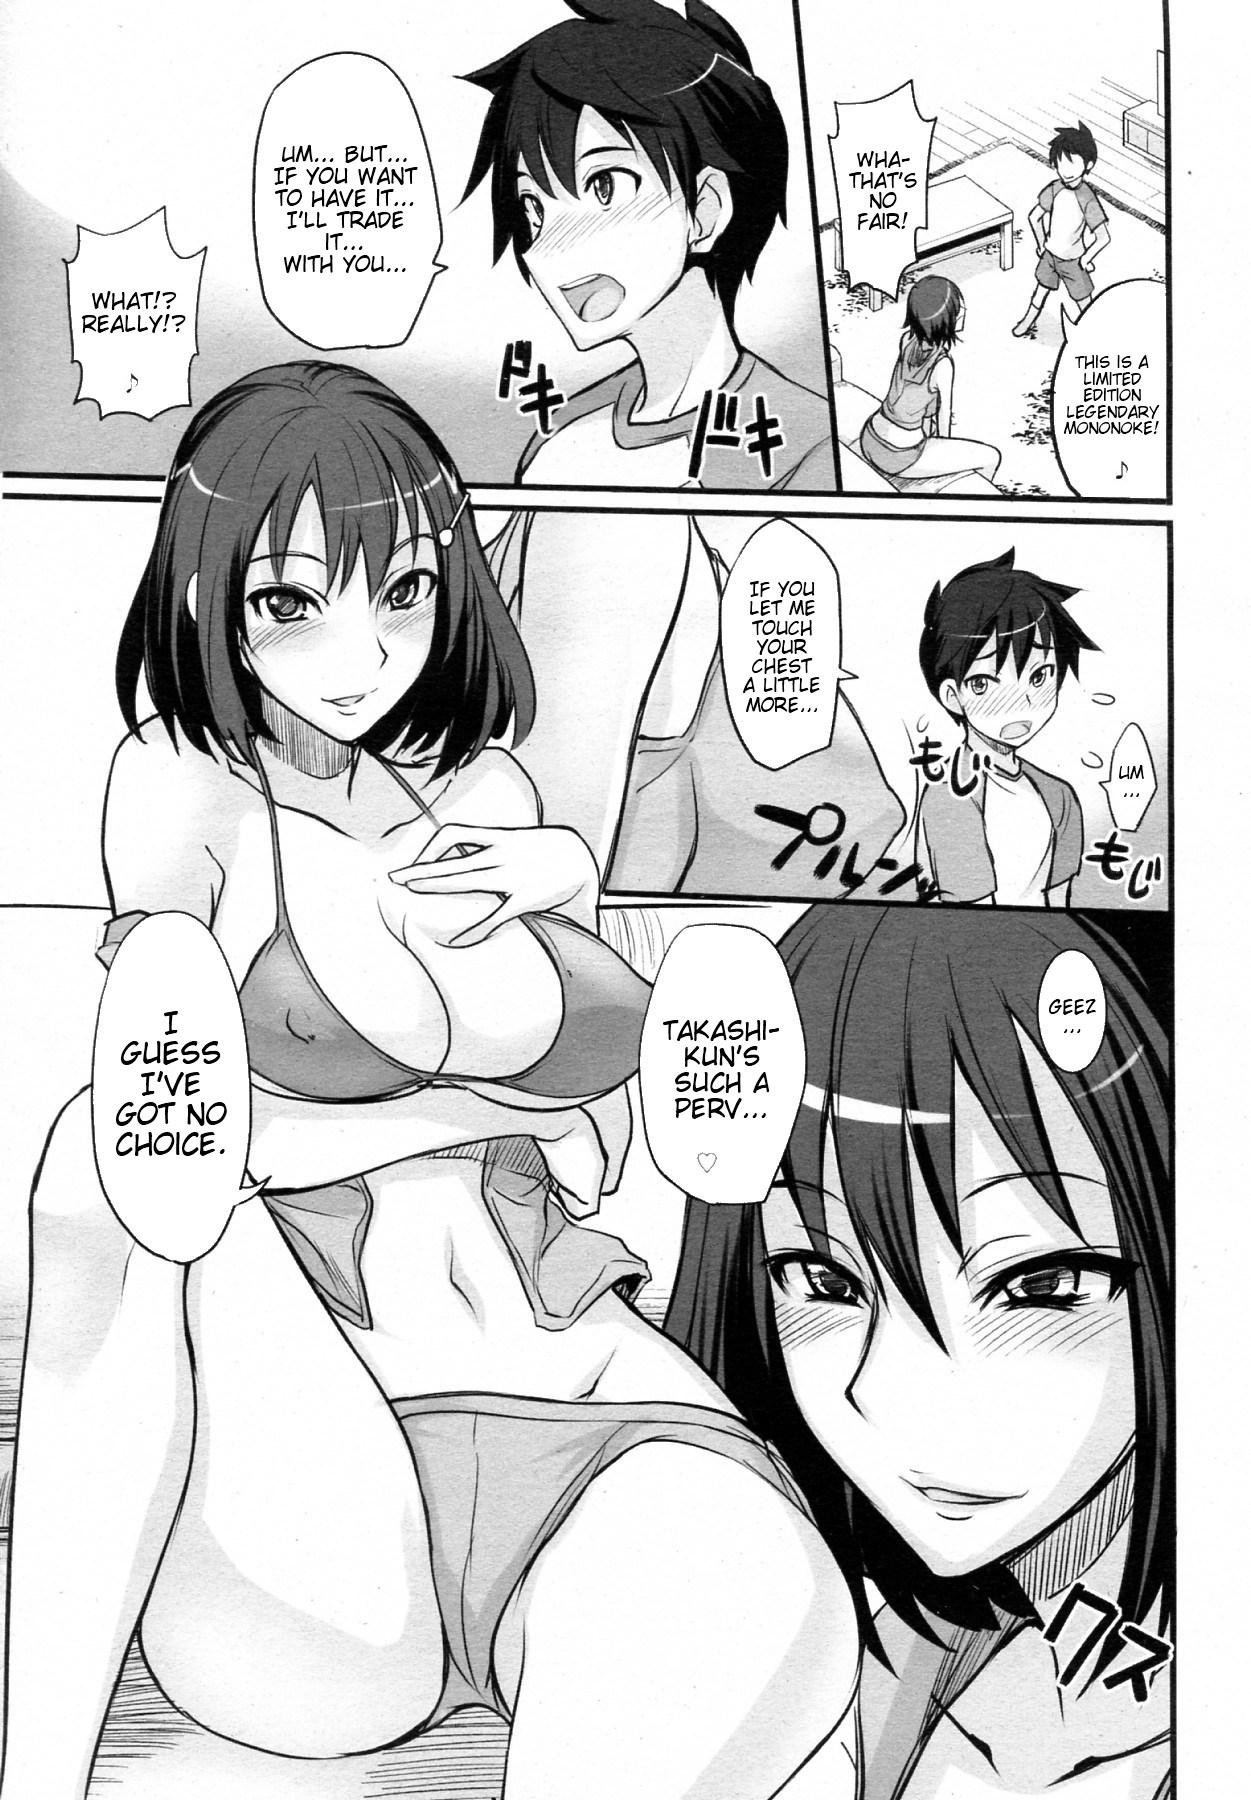 Exhibition Game Shiyouze! | Let's Play a Game! Adult Toys - Page 7